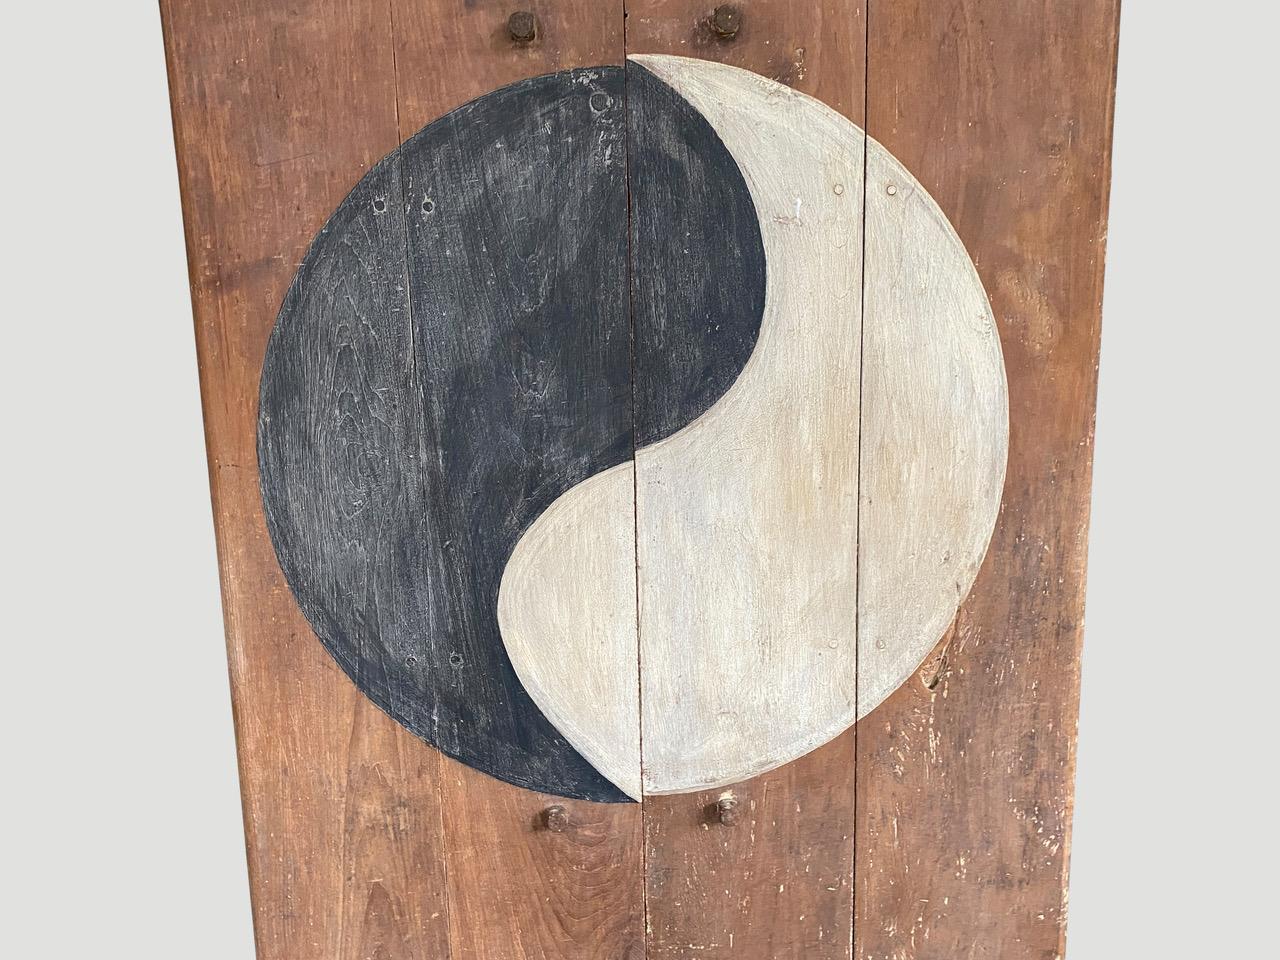 Impressive teak wood doors with original hardware. This beautiful door could also be made into a coffee table, used as a head board or hung as a piece of art. The circle meaning is the Yin and the Yang. The black colour is Yin the darkness and white